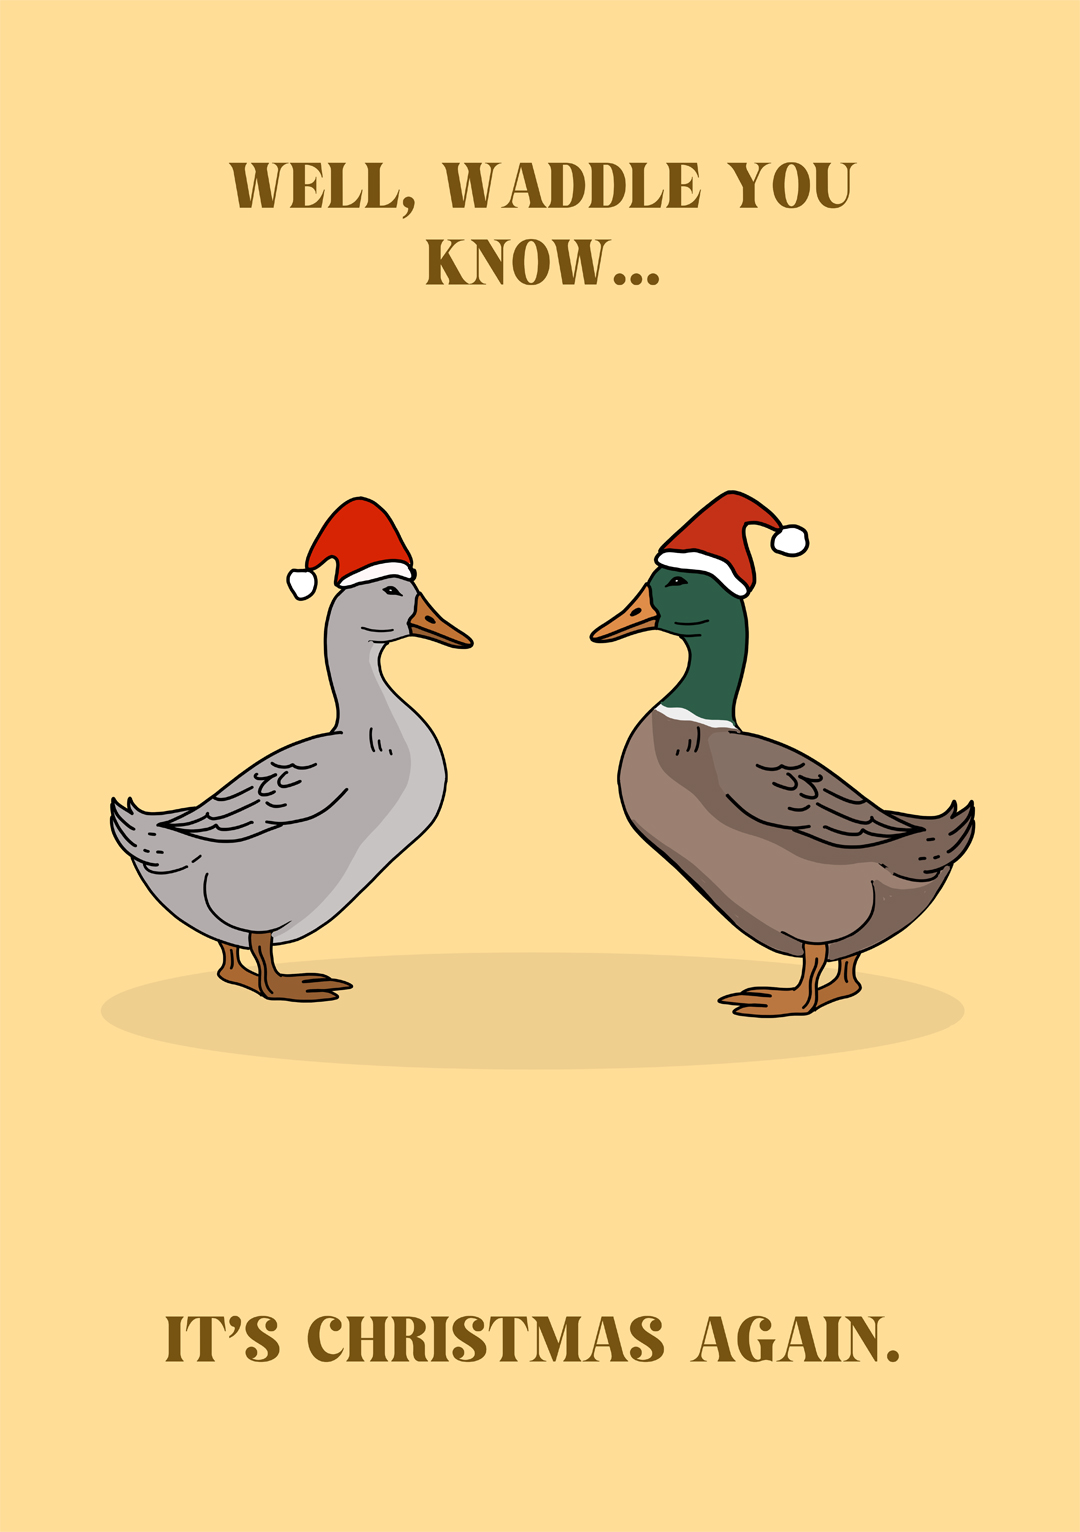 Waddle You Know it's Christmas Again